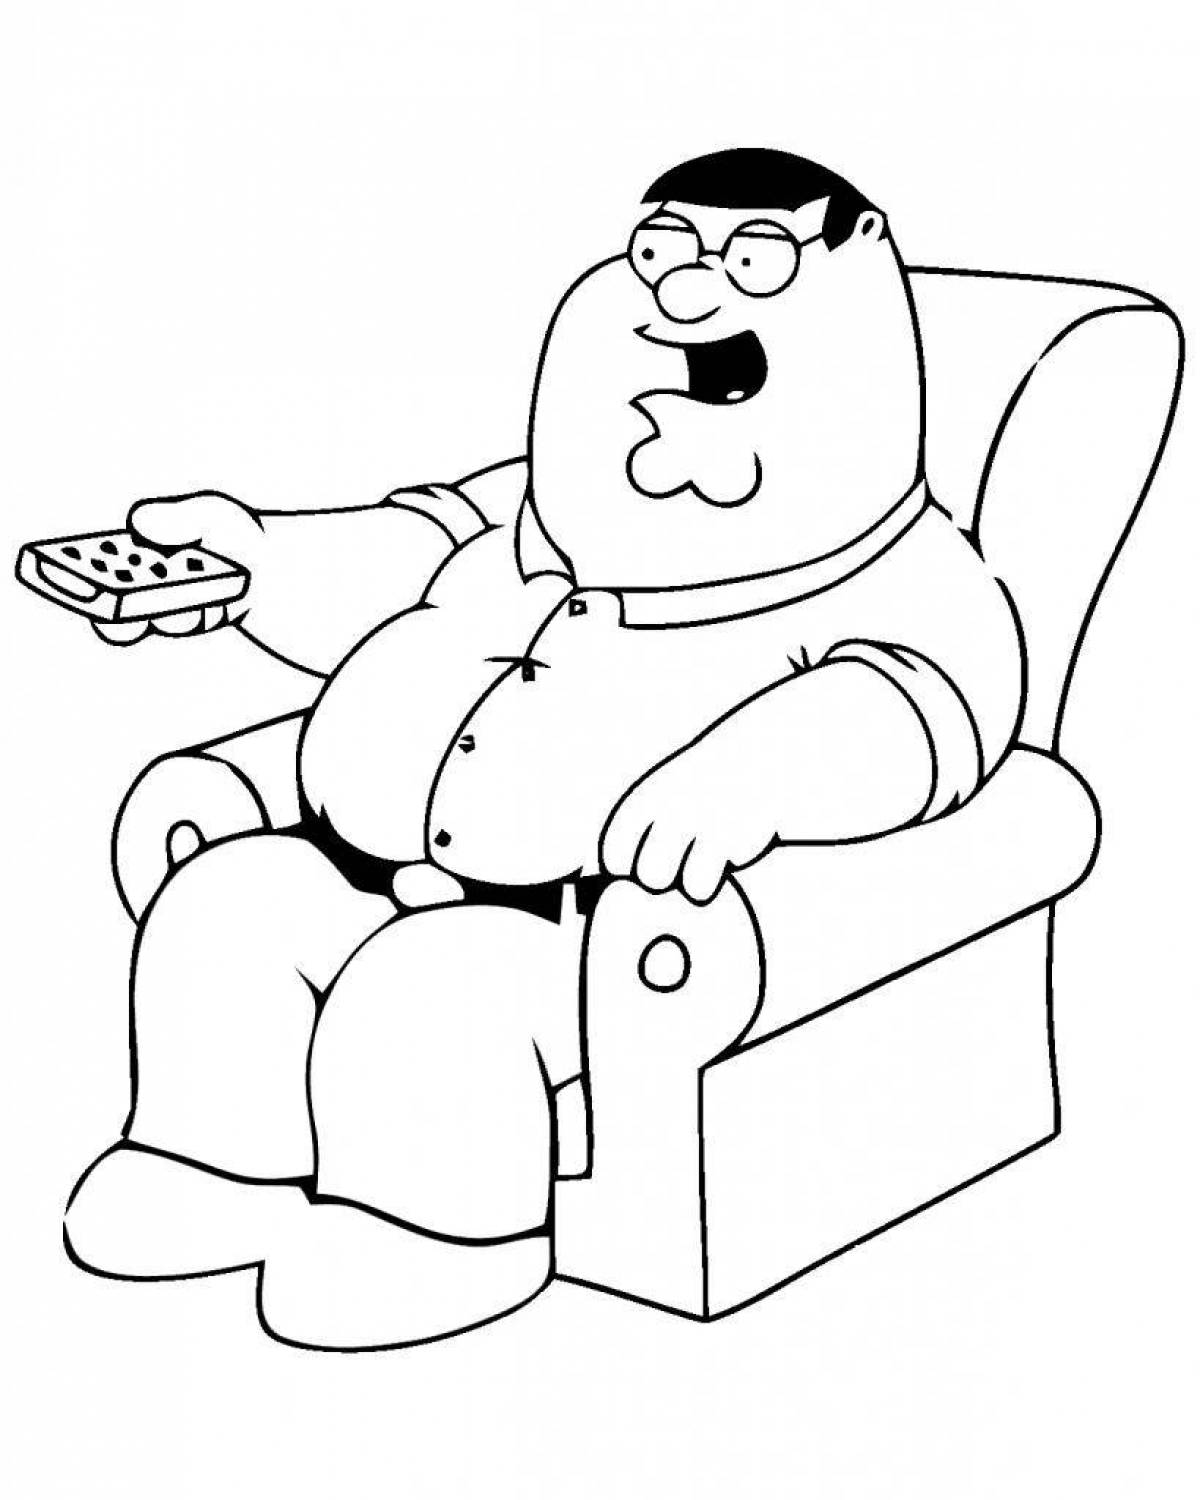 Peter griffin playful coloring page